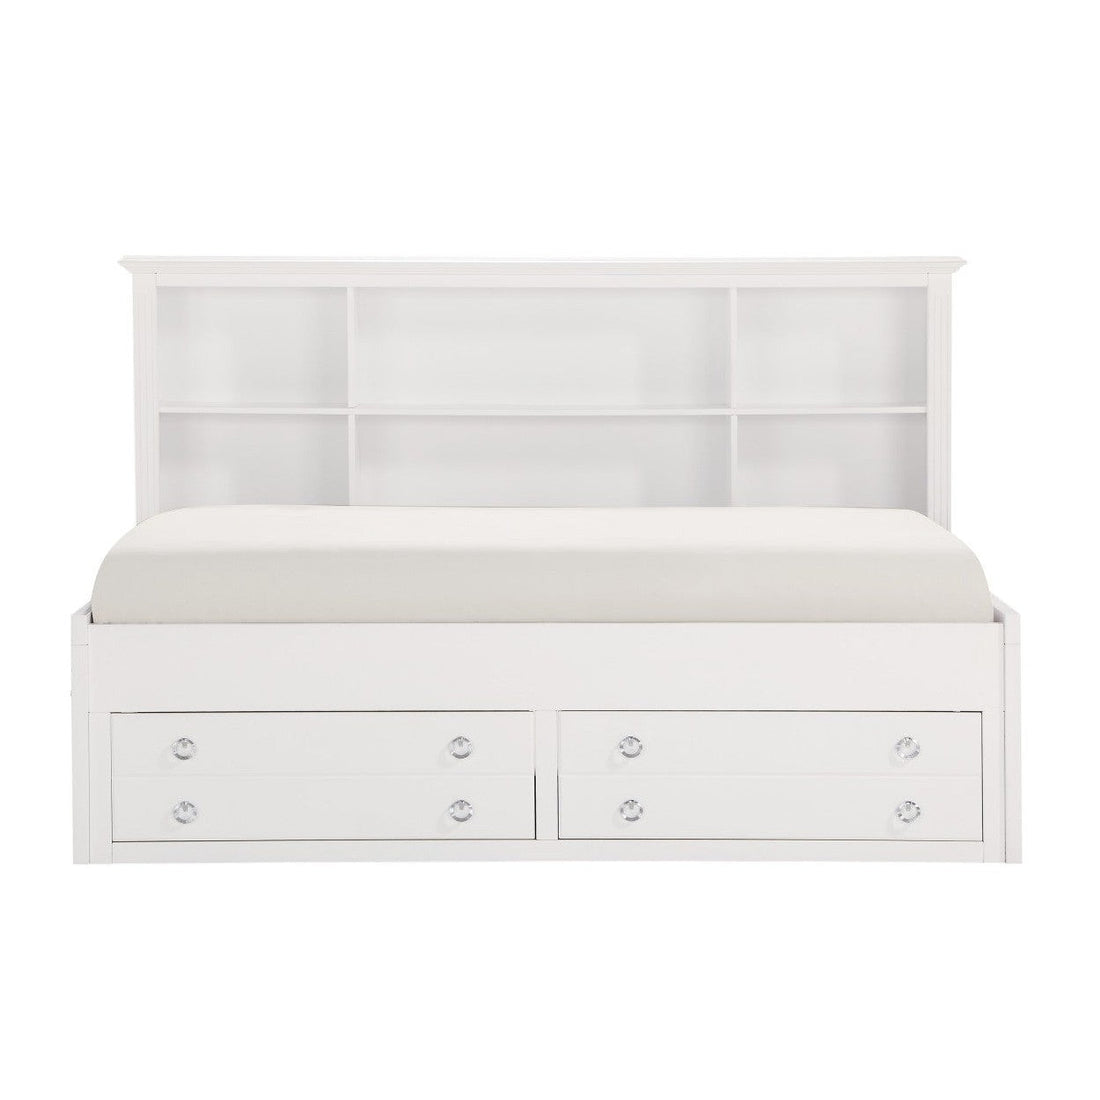 (2) Full Lounge Storage Bed, White 2058WHPRF-1*